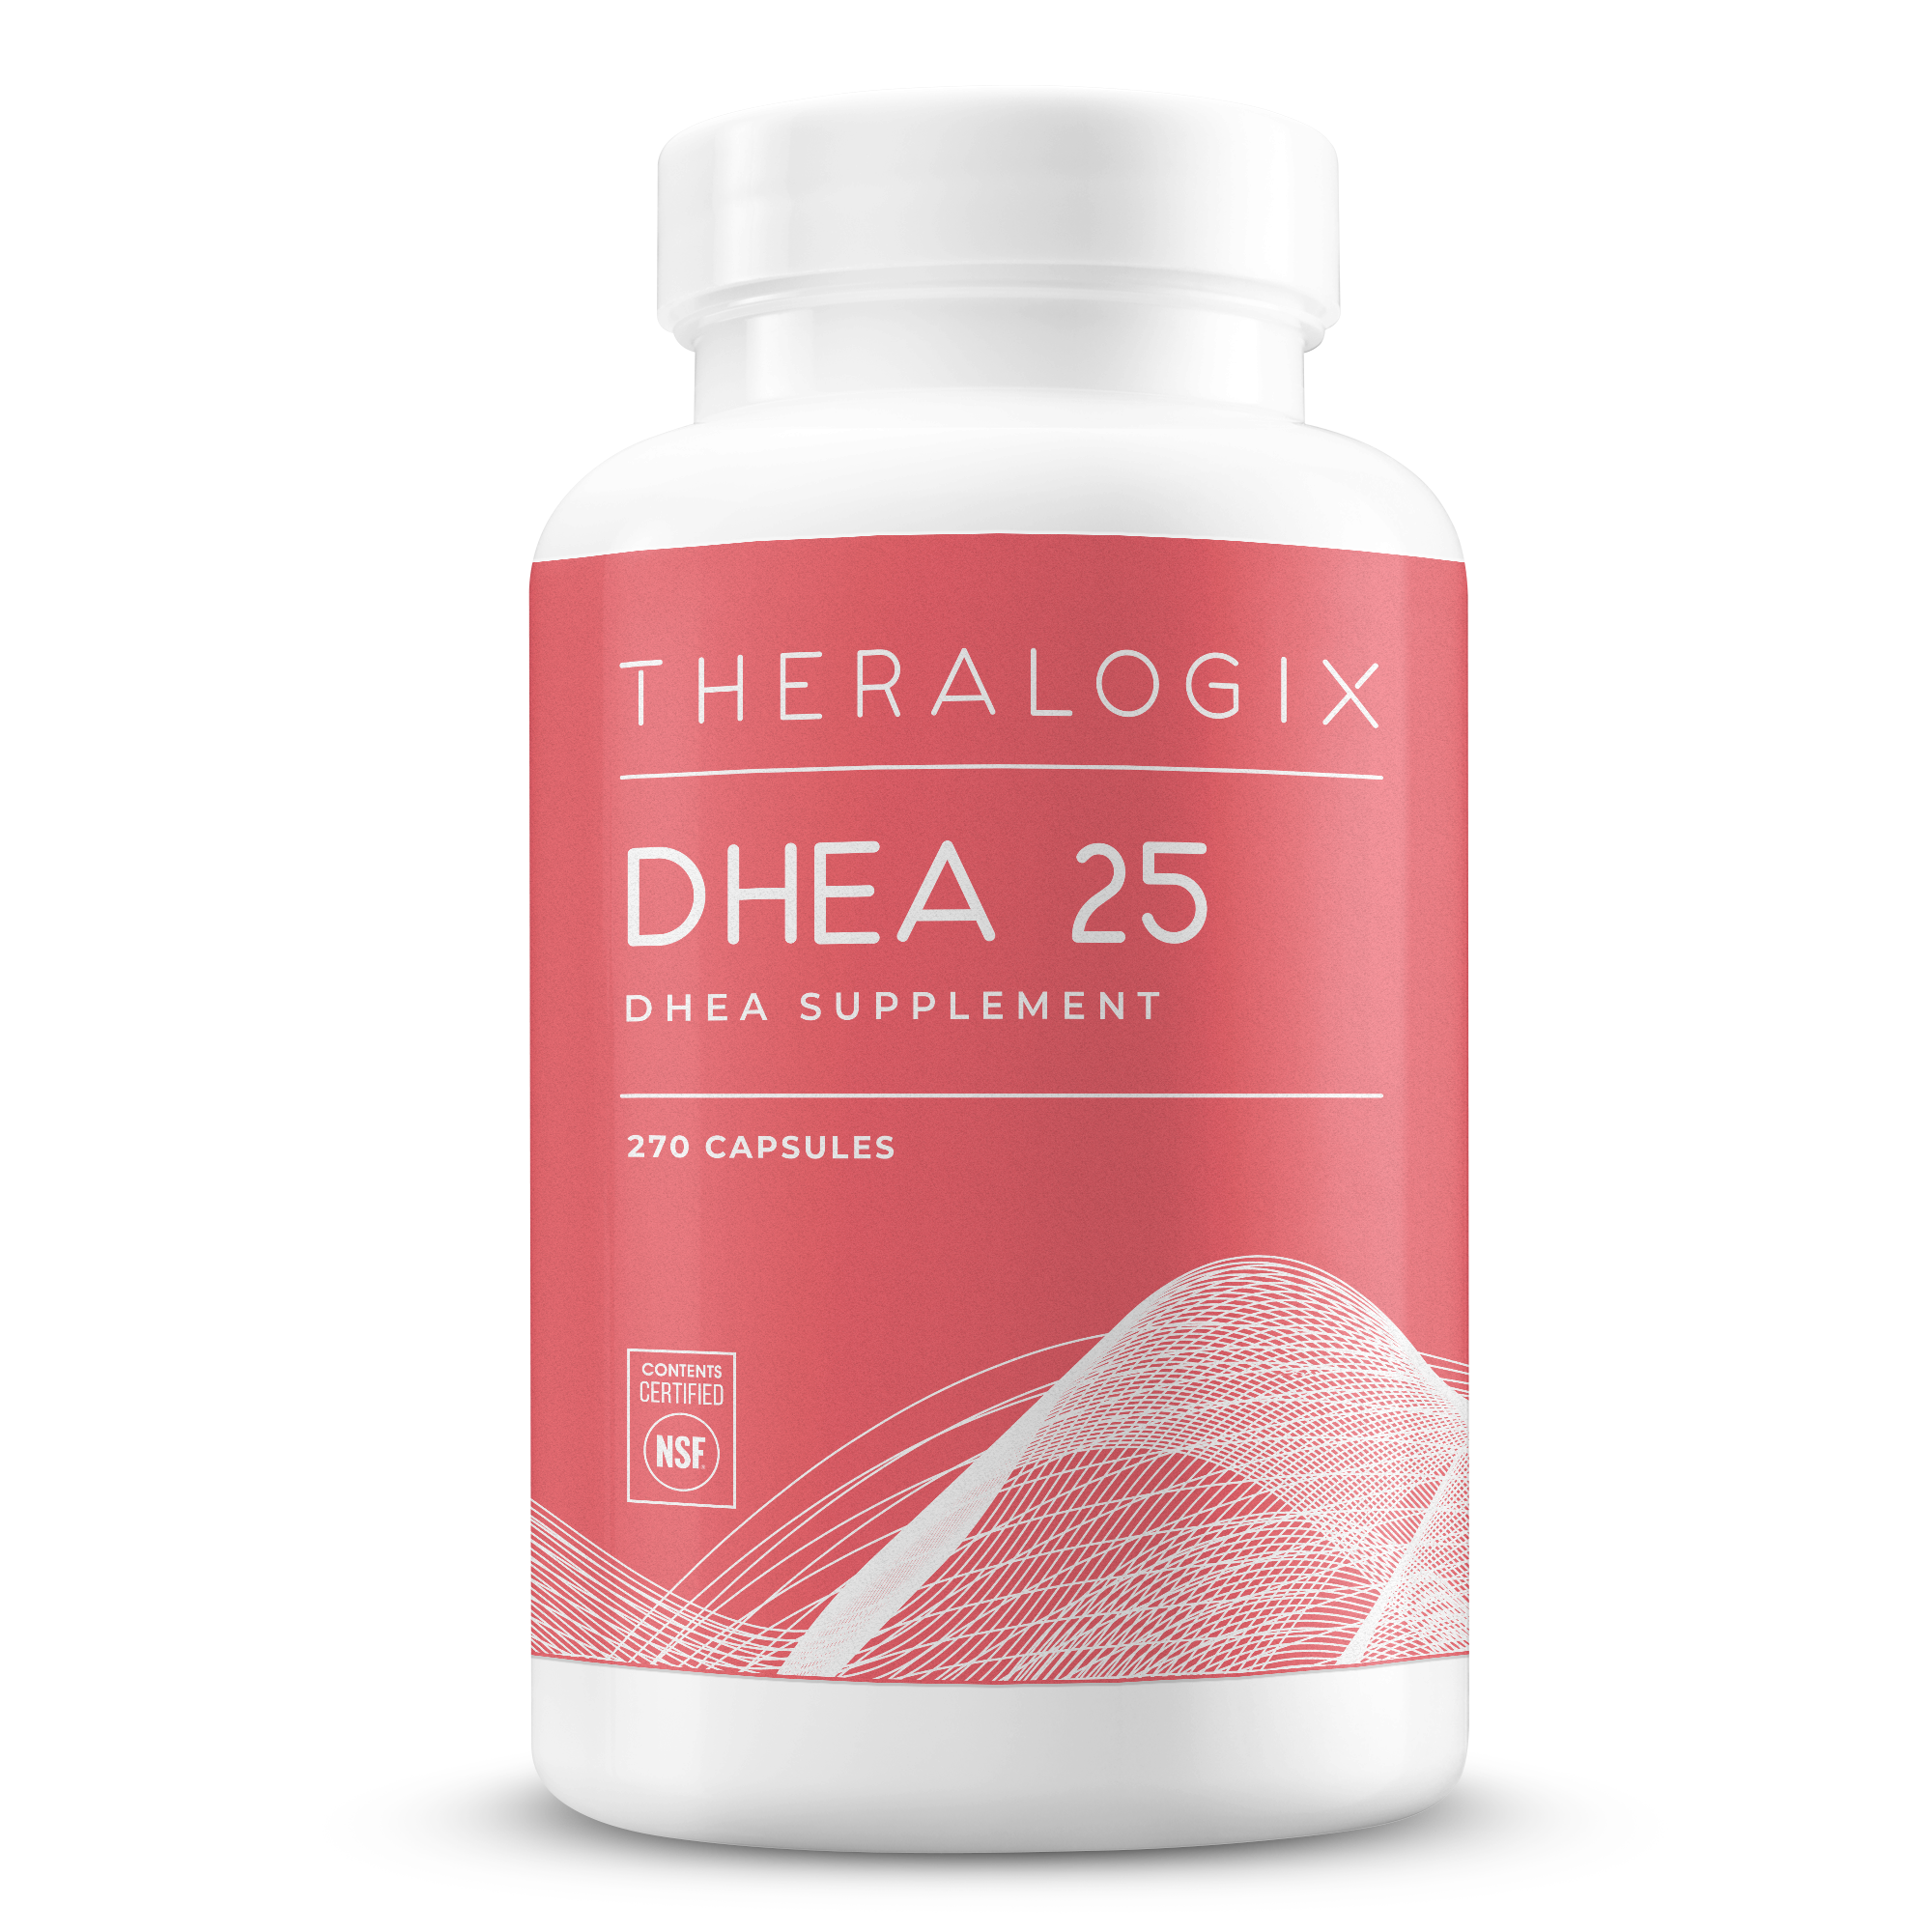 DHEA 25 is a micronized DHEA supplement to support female fertility, plus quality of life for older adults.*   